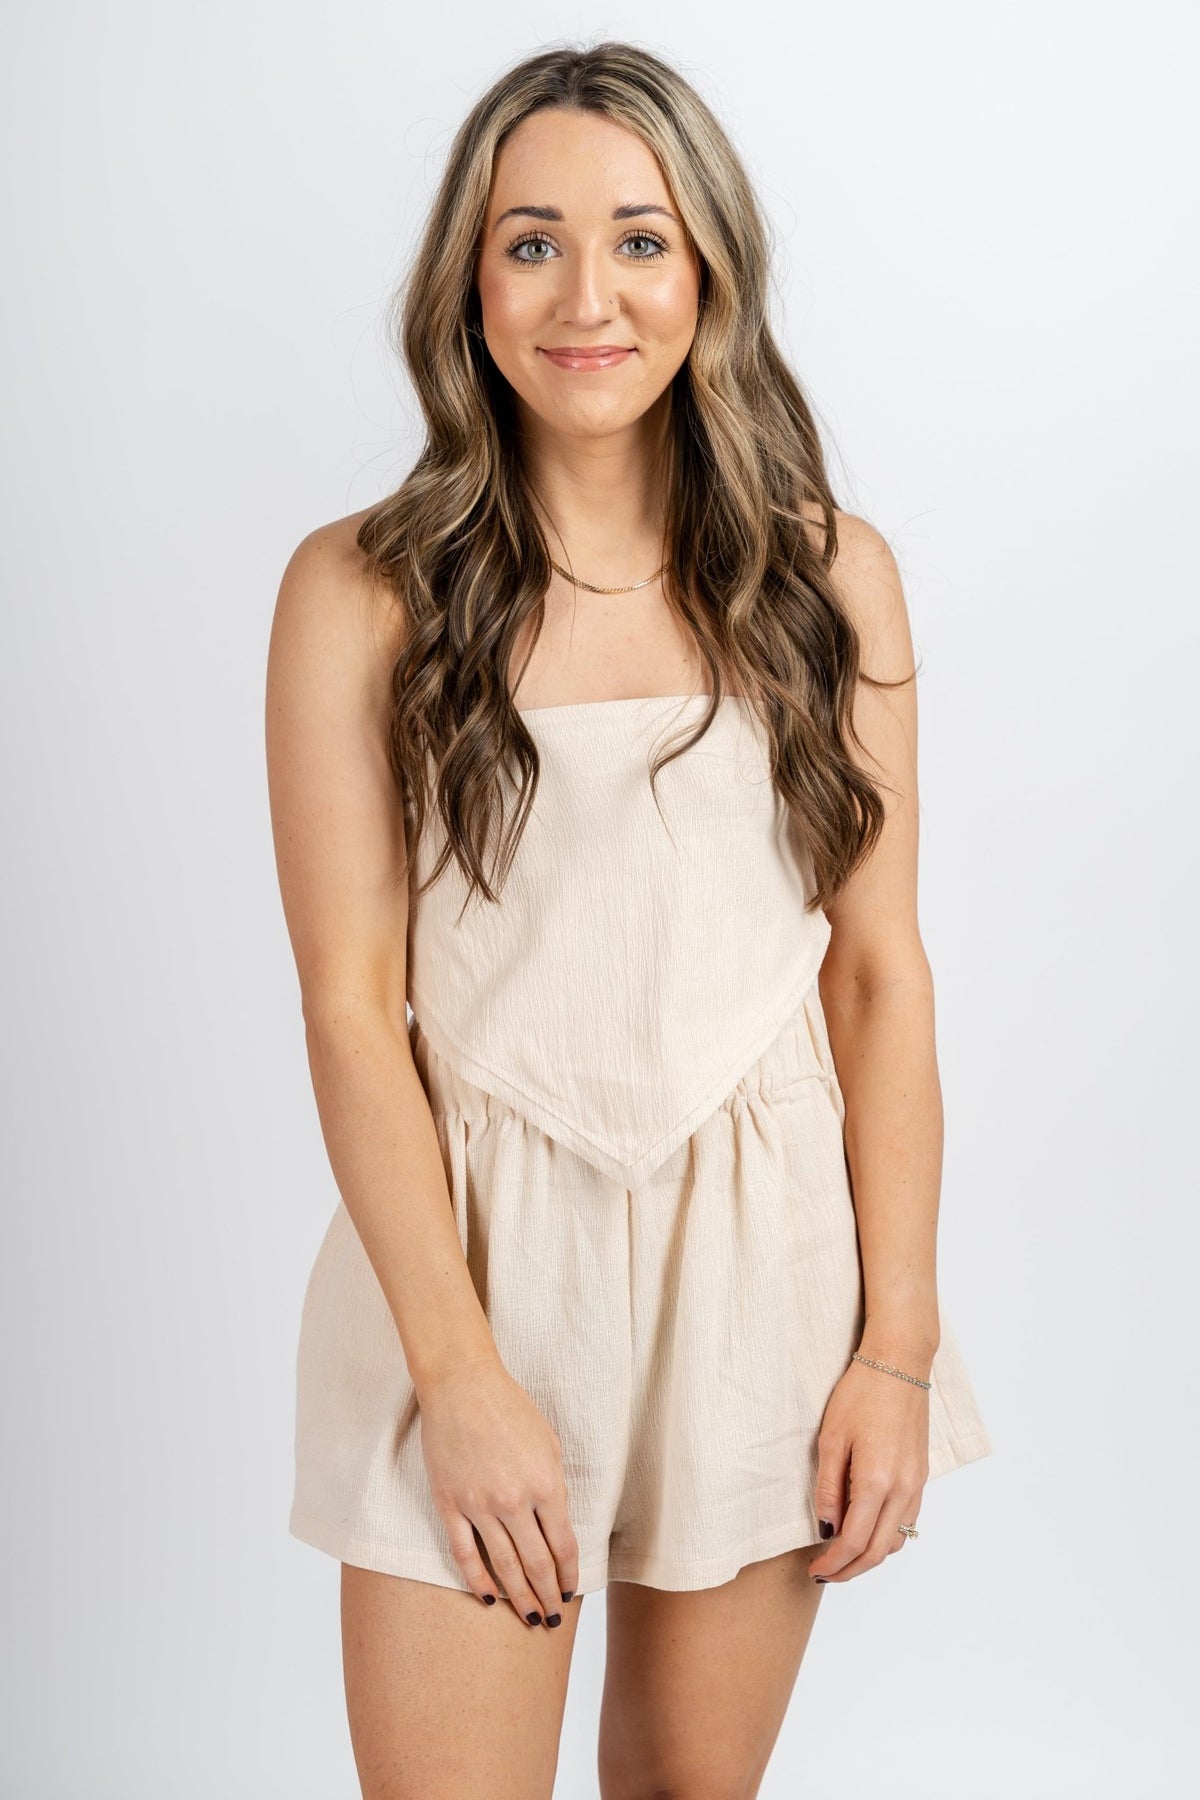 Cropped gauze top light taupe - Trendy Top - Cute Vacation Collection at Lush Fashion Lounge Boutique in Oklahoma City